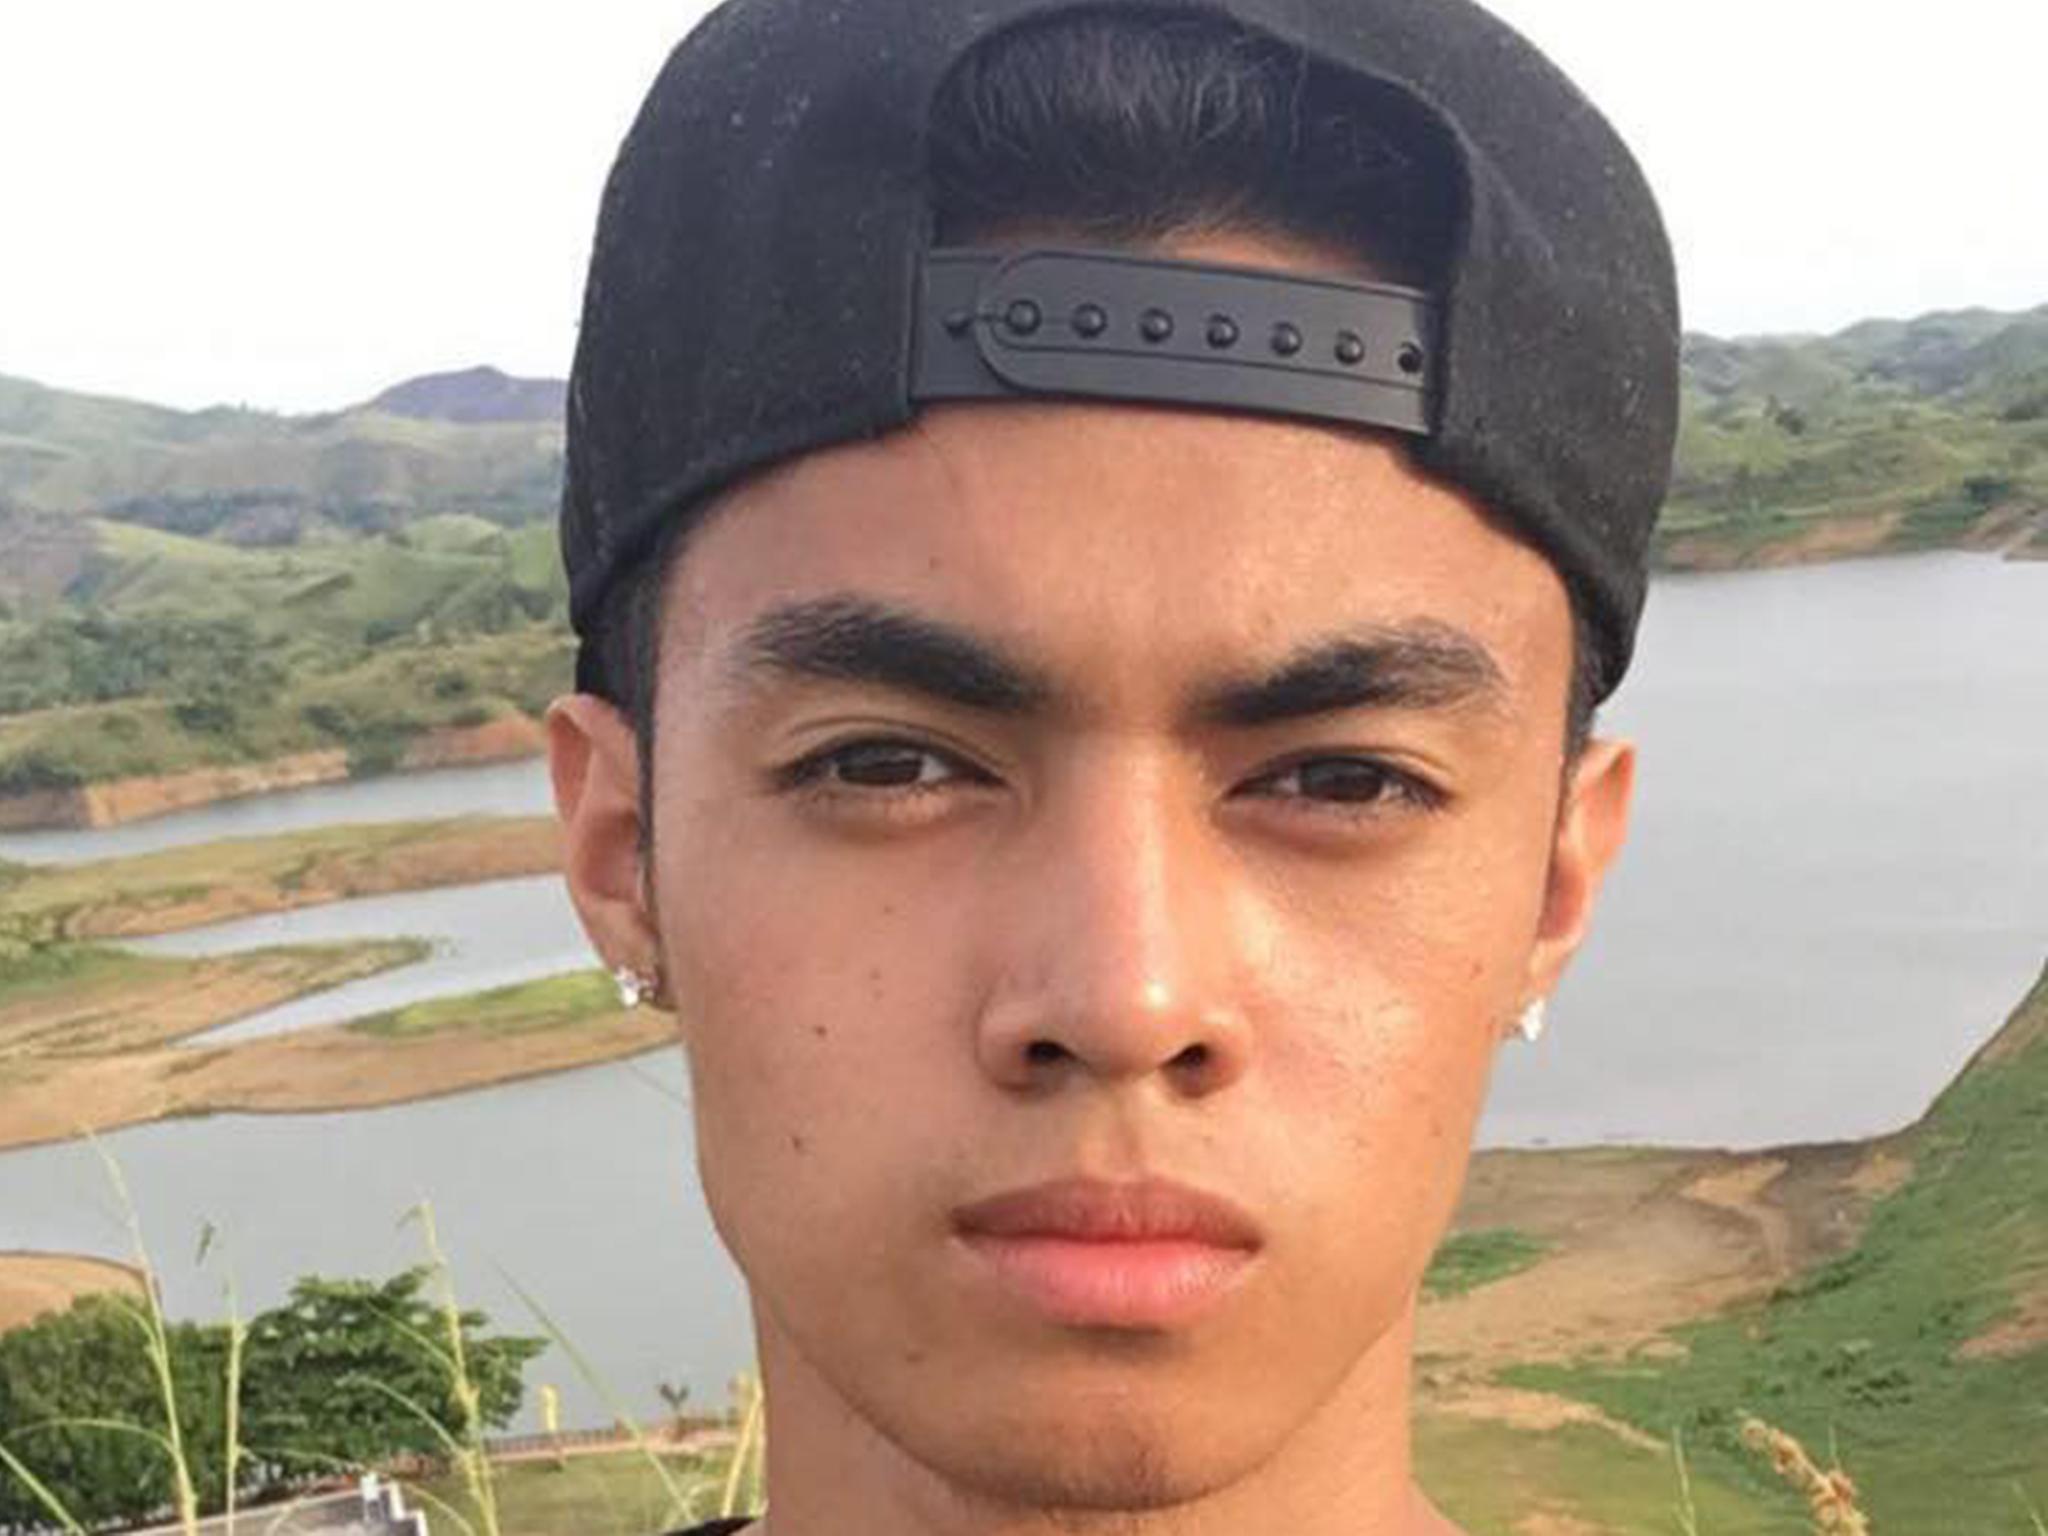 Bryxzel Galeon graduated from university three weeks before he drowned